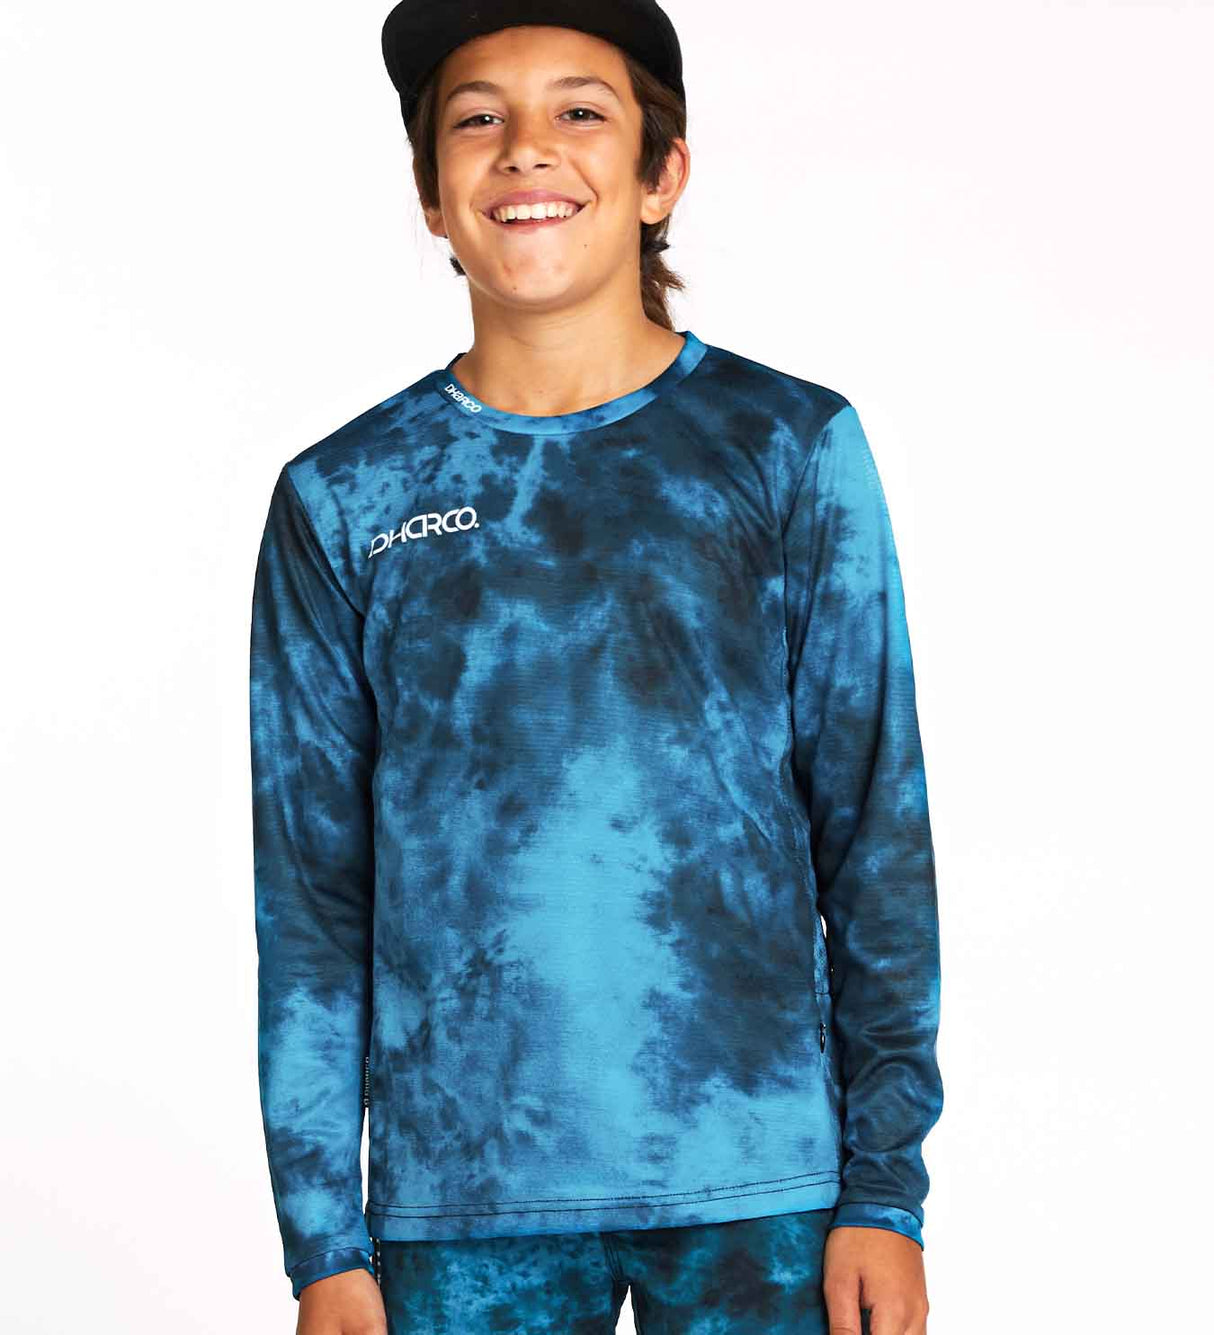 YOUTH GRAVITY JERSEY | SNOWSHOE